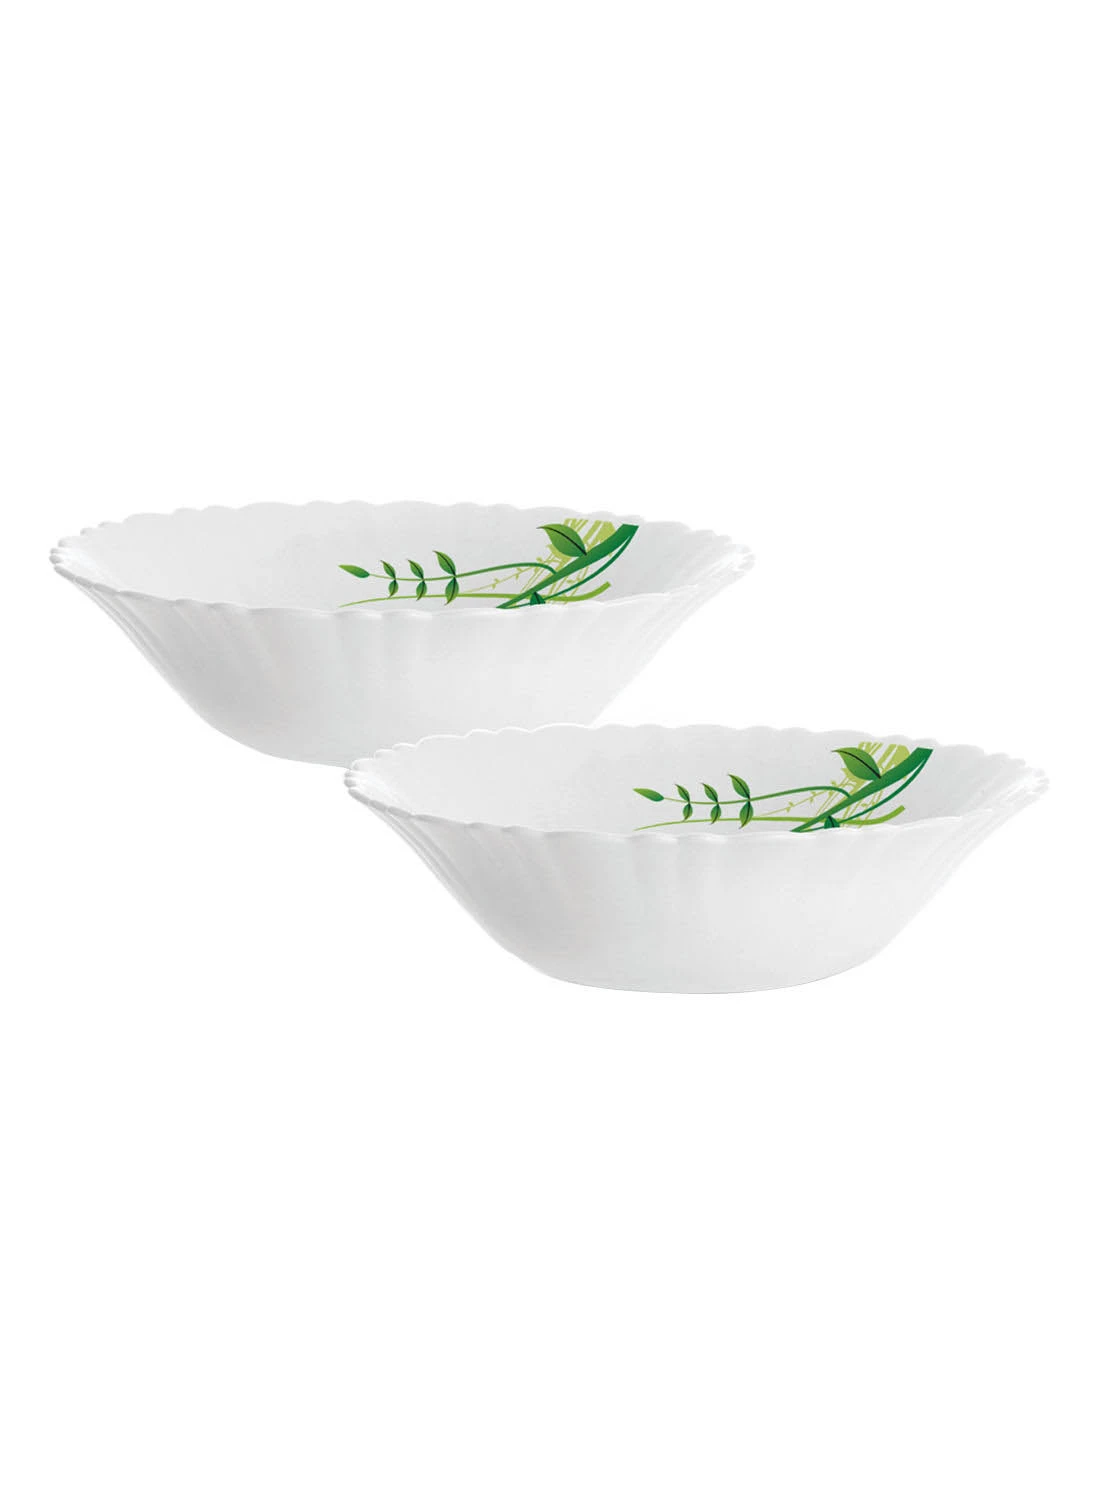 BOROSIL 2 Piece Opalware Bowl Set For Everyday Use - Light Weight - For Soup, Salad, Dessert - Bowl Set - Soup Set - Bowls - Soup Dishes - Salad Bowl - Serves 2 - White/Green